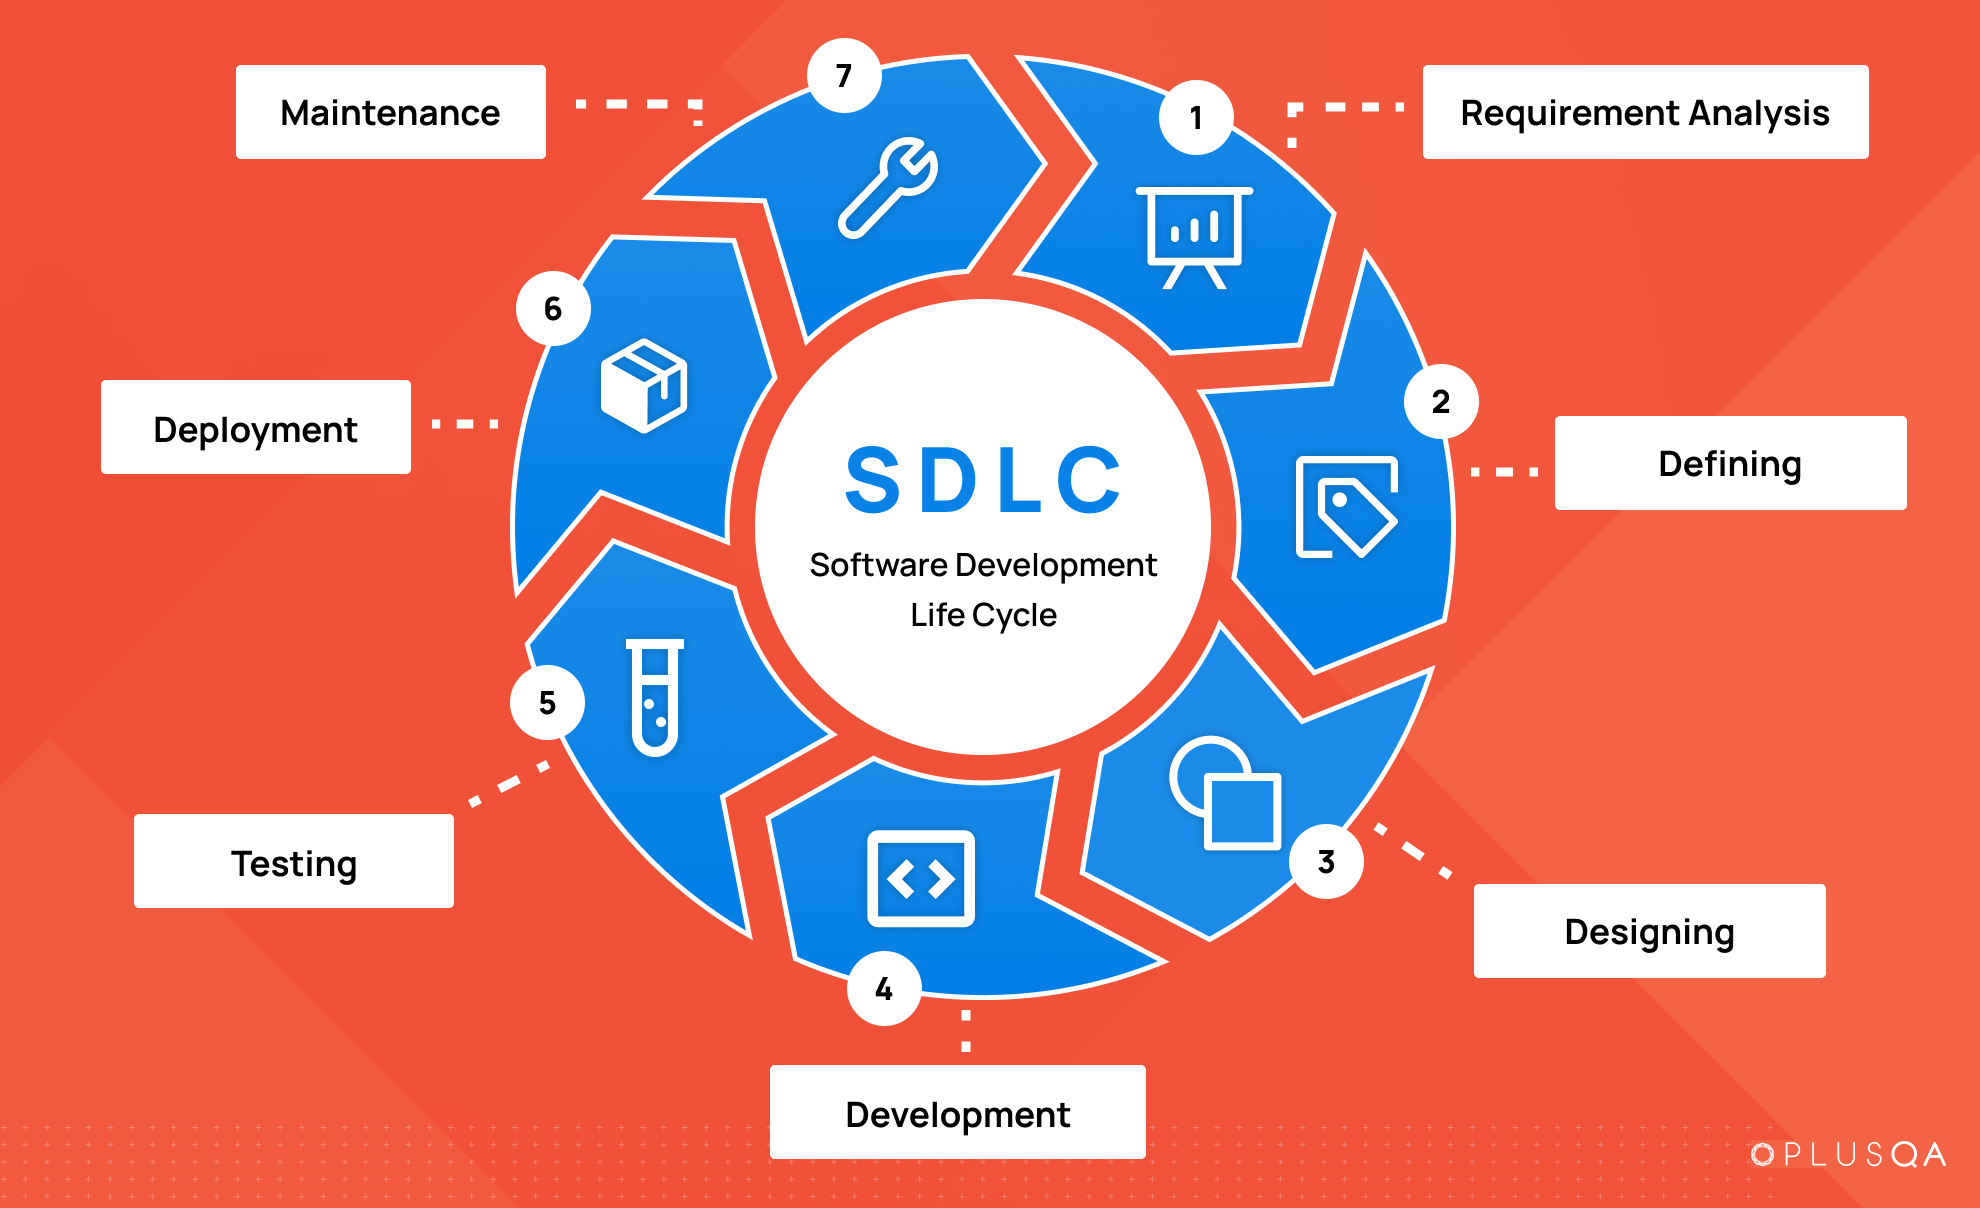 Diagram showing the Software Development Life Cycle: 1. Requirement Analysis 2. Defining 3. Designing 4. Development 5. Testing 6. Deployment 7. Maintenance